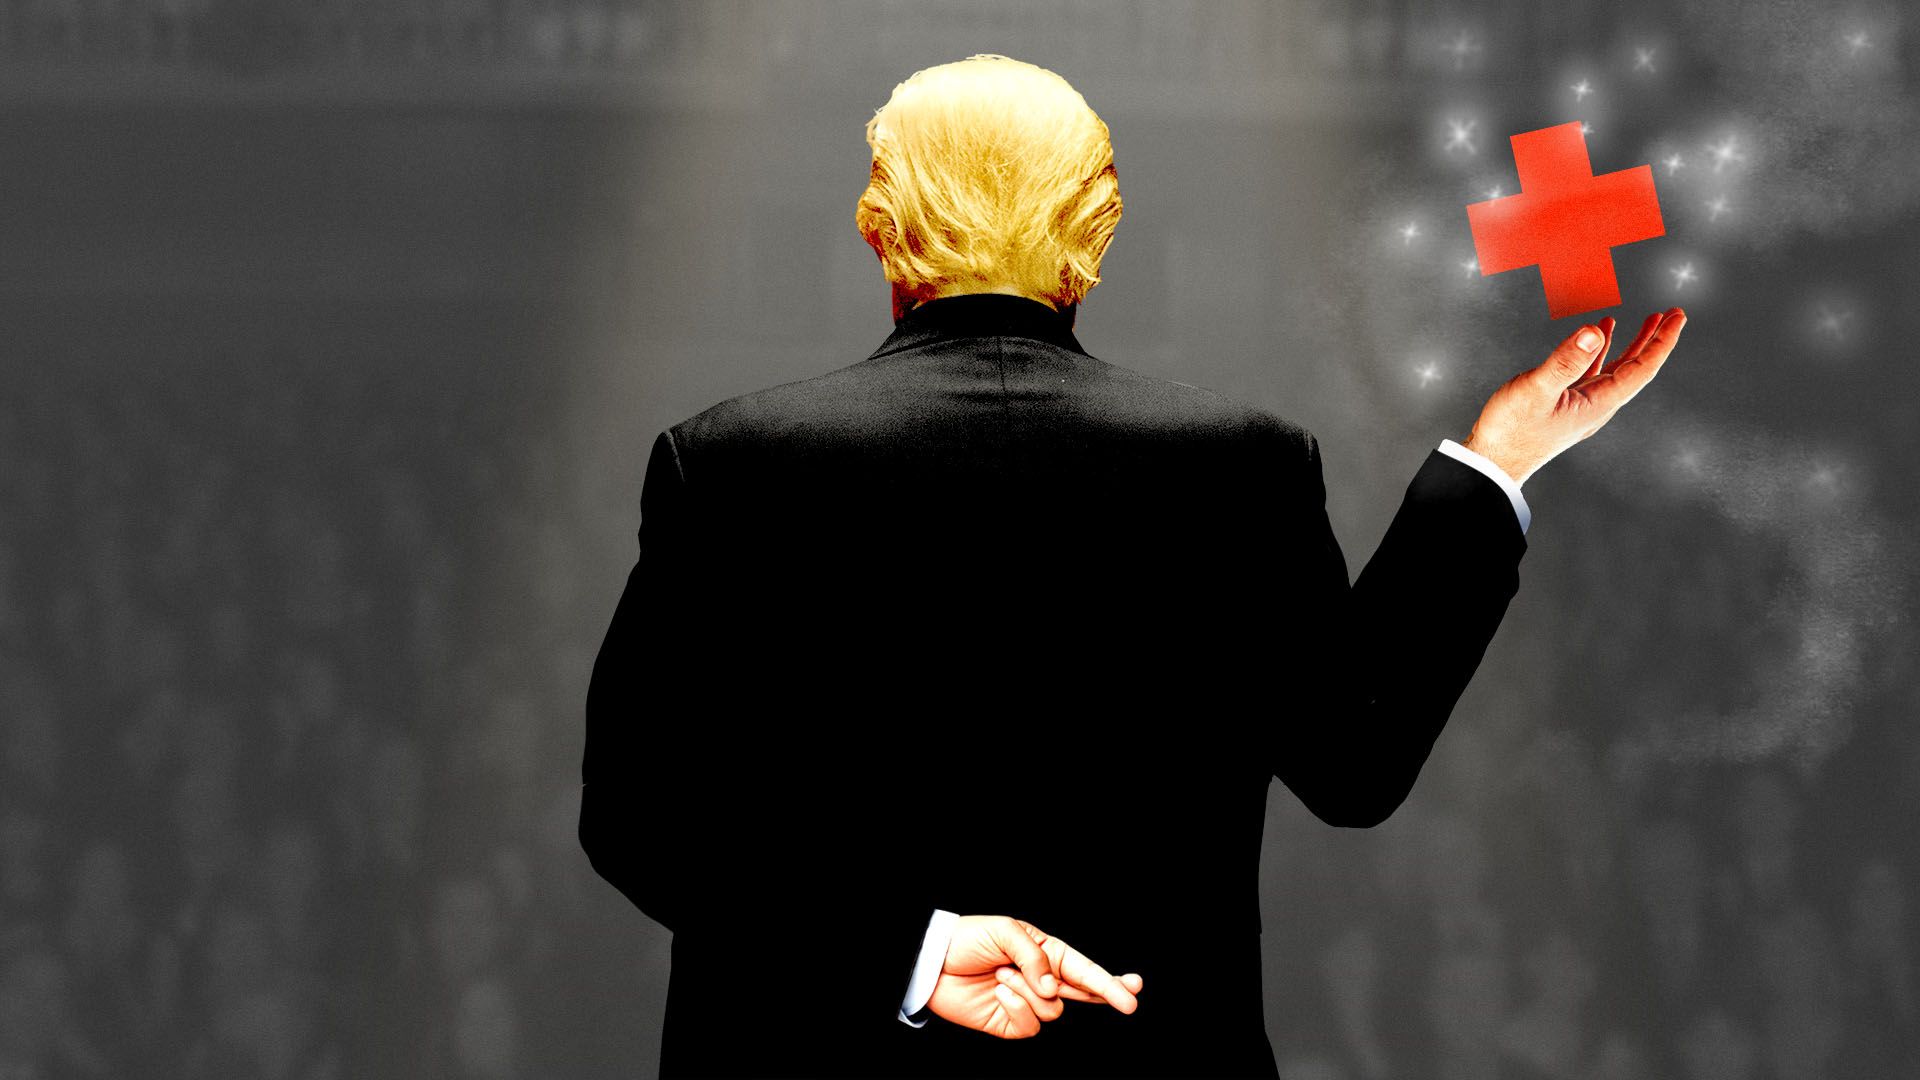 Illustration of President Donald Trump presenting a levitating red cross with his fingers crossed behind his back